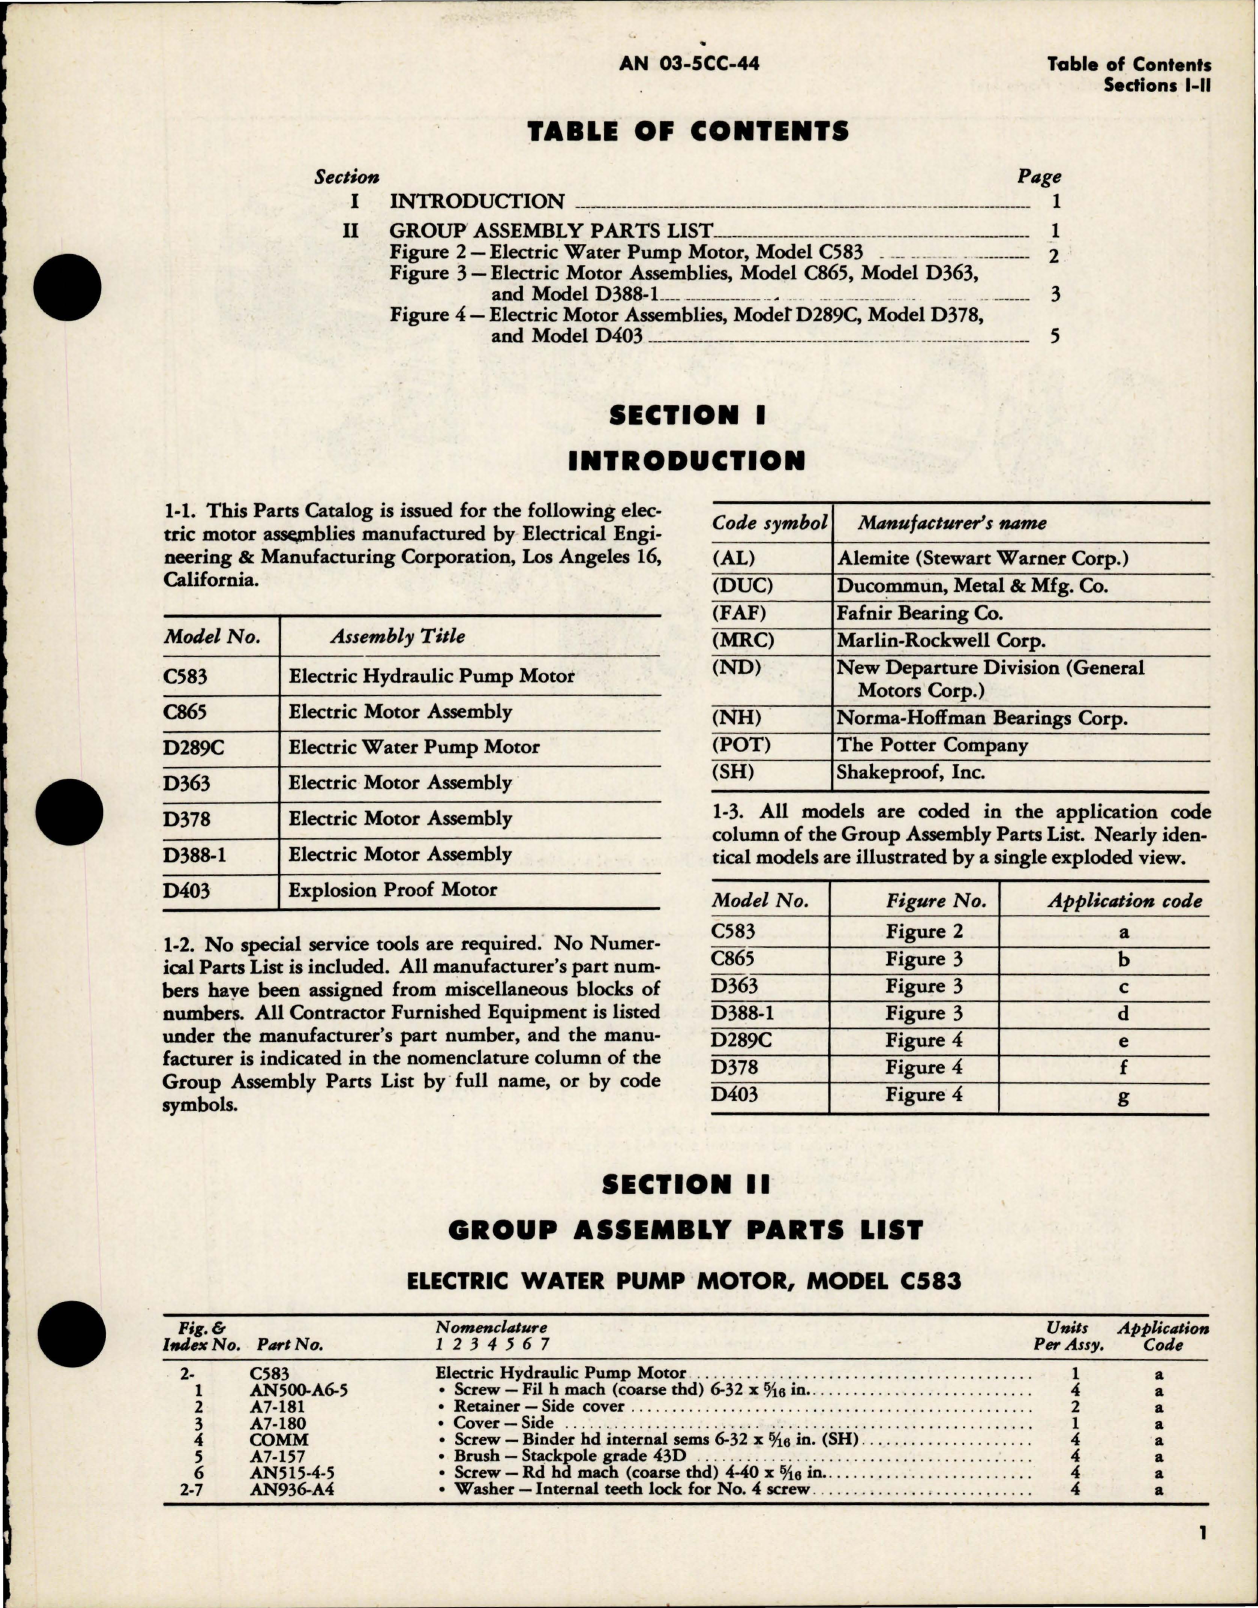 Sample page 5 from AirCorps Library document: Parts Catalog for Electric Motors